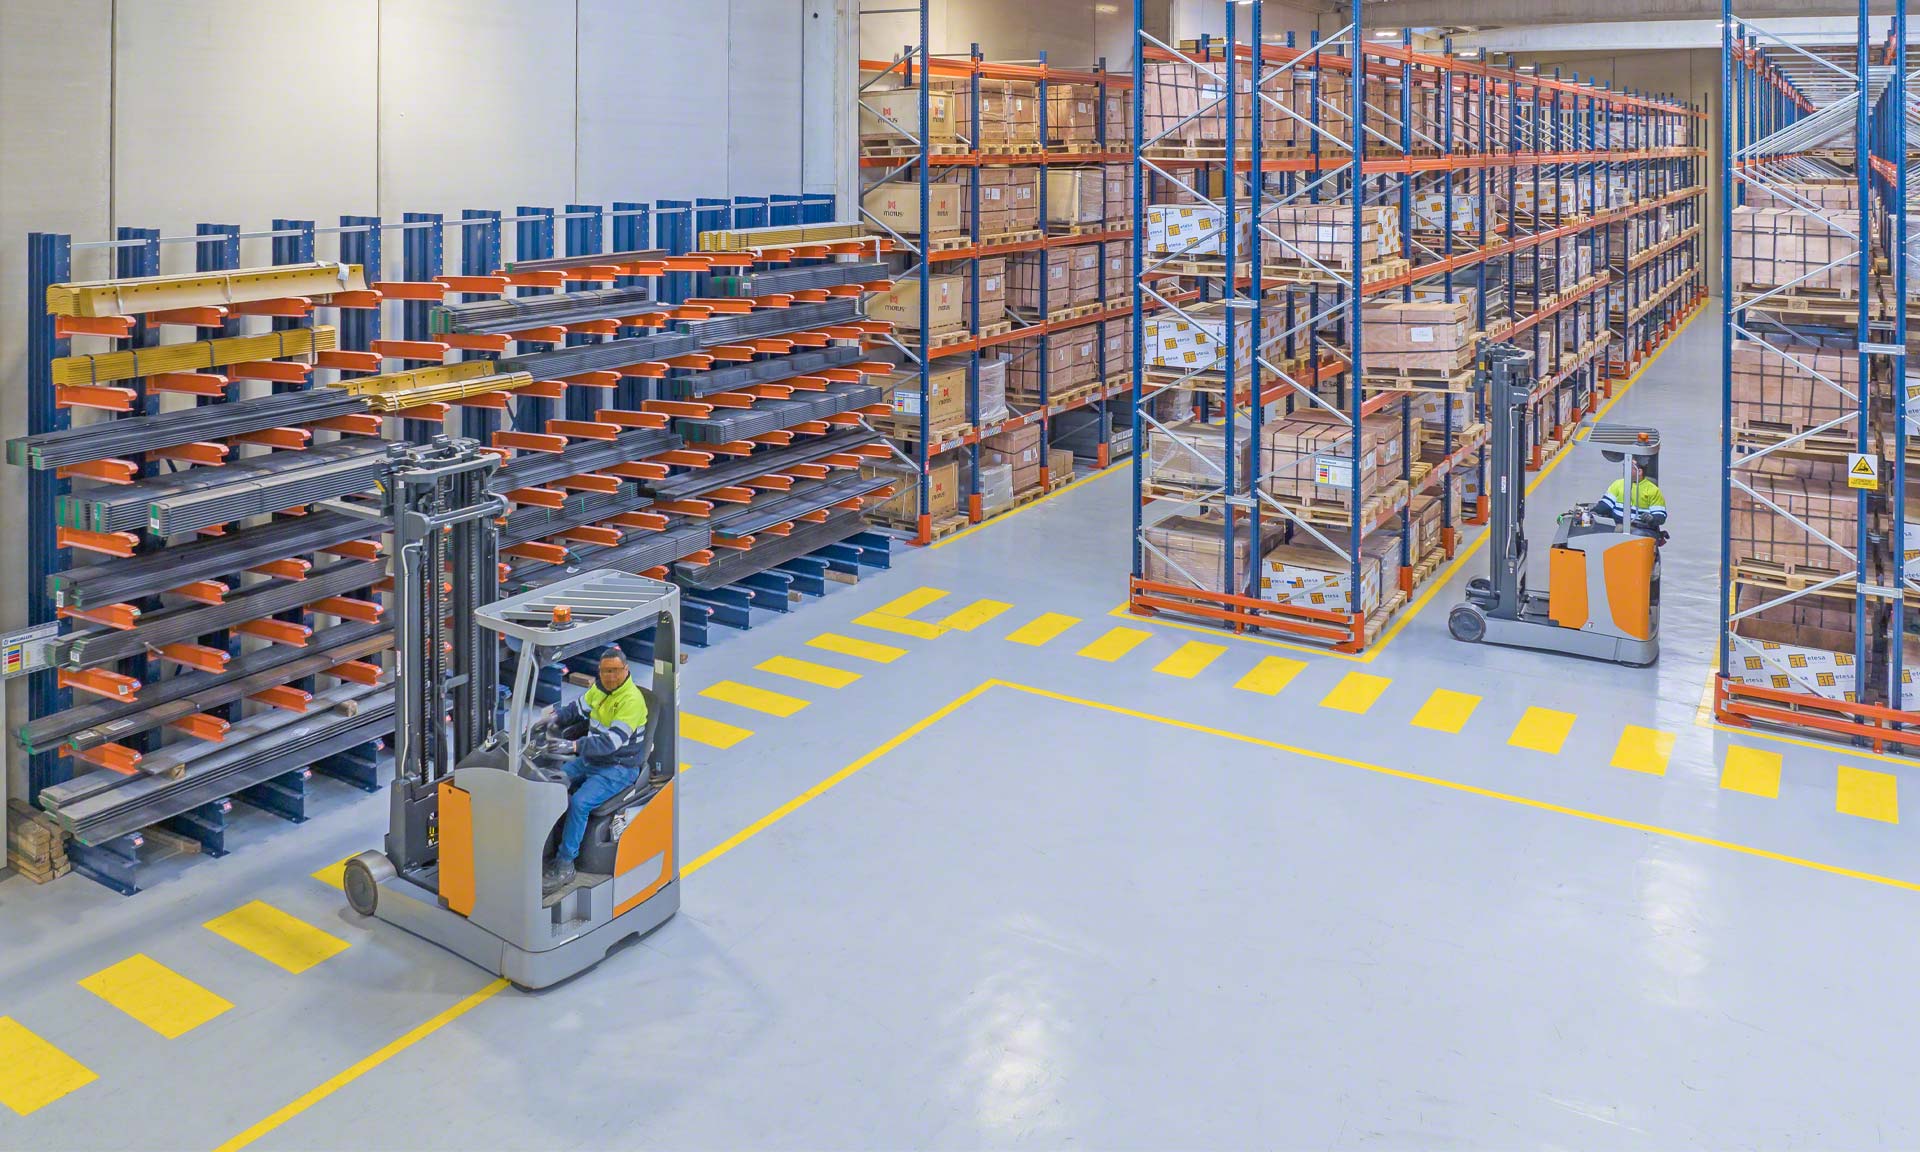 ETESA digitises its warehouse management with Mecalux's Easy WMS